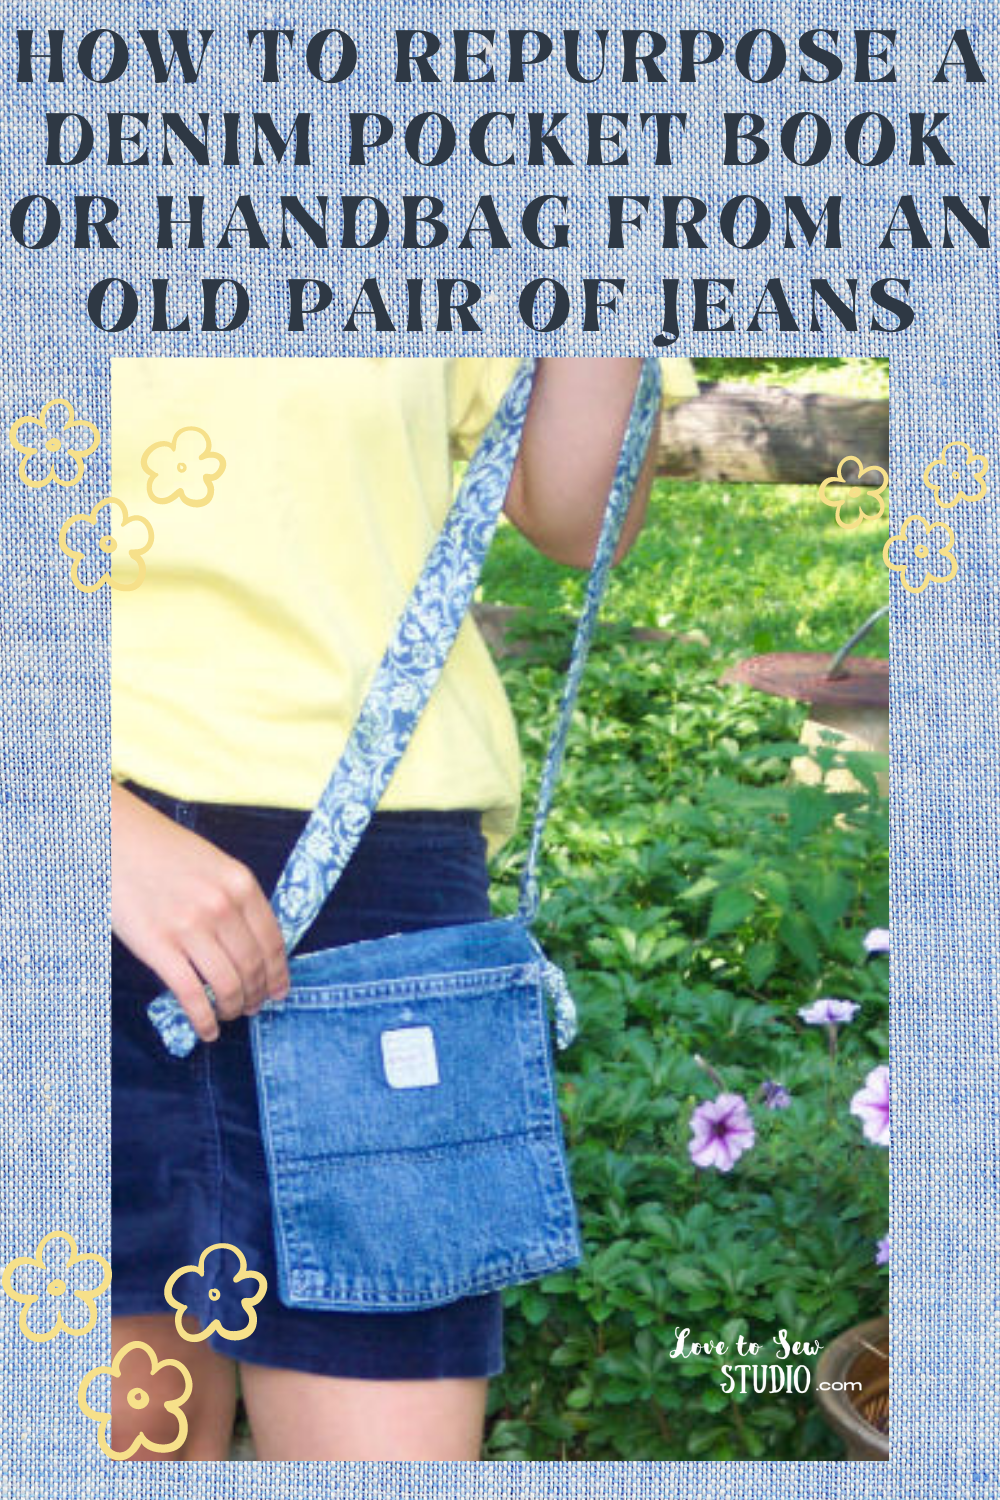 How to REPURPOSE a Denim Pocket Book or Handbag from an old pair of jeans